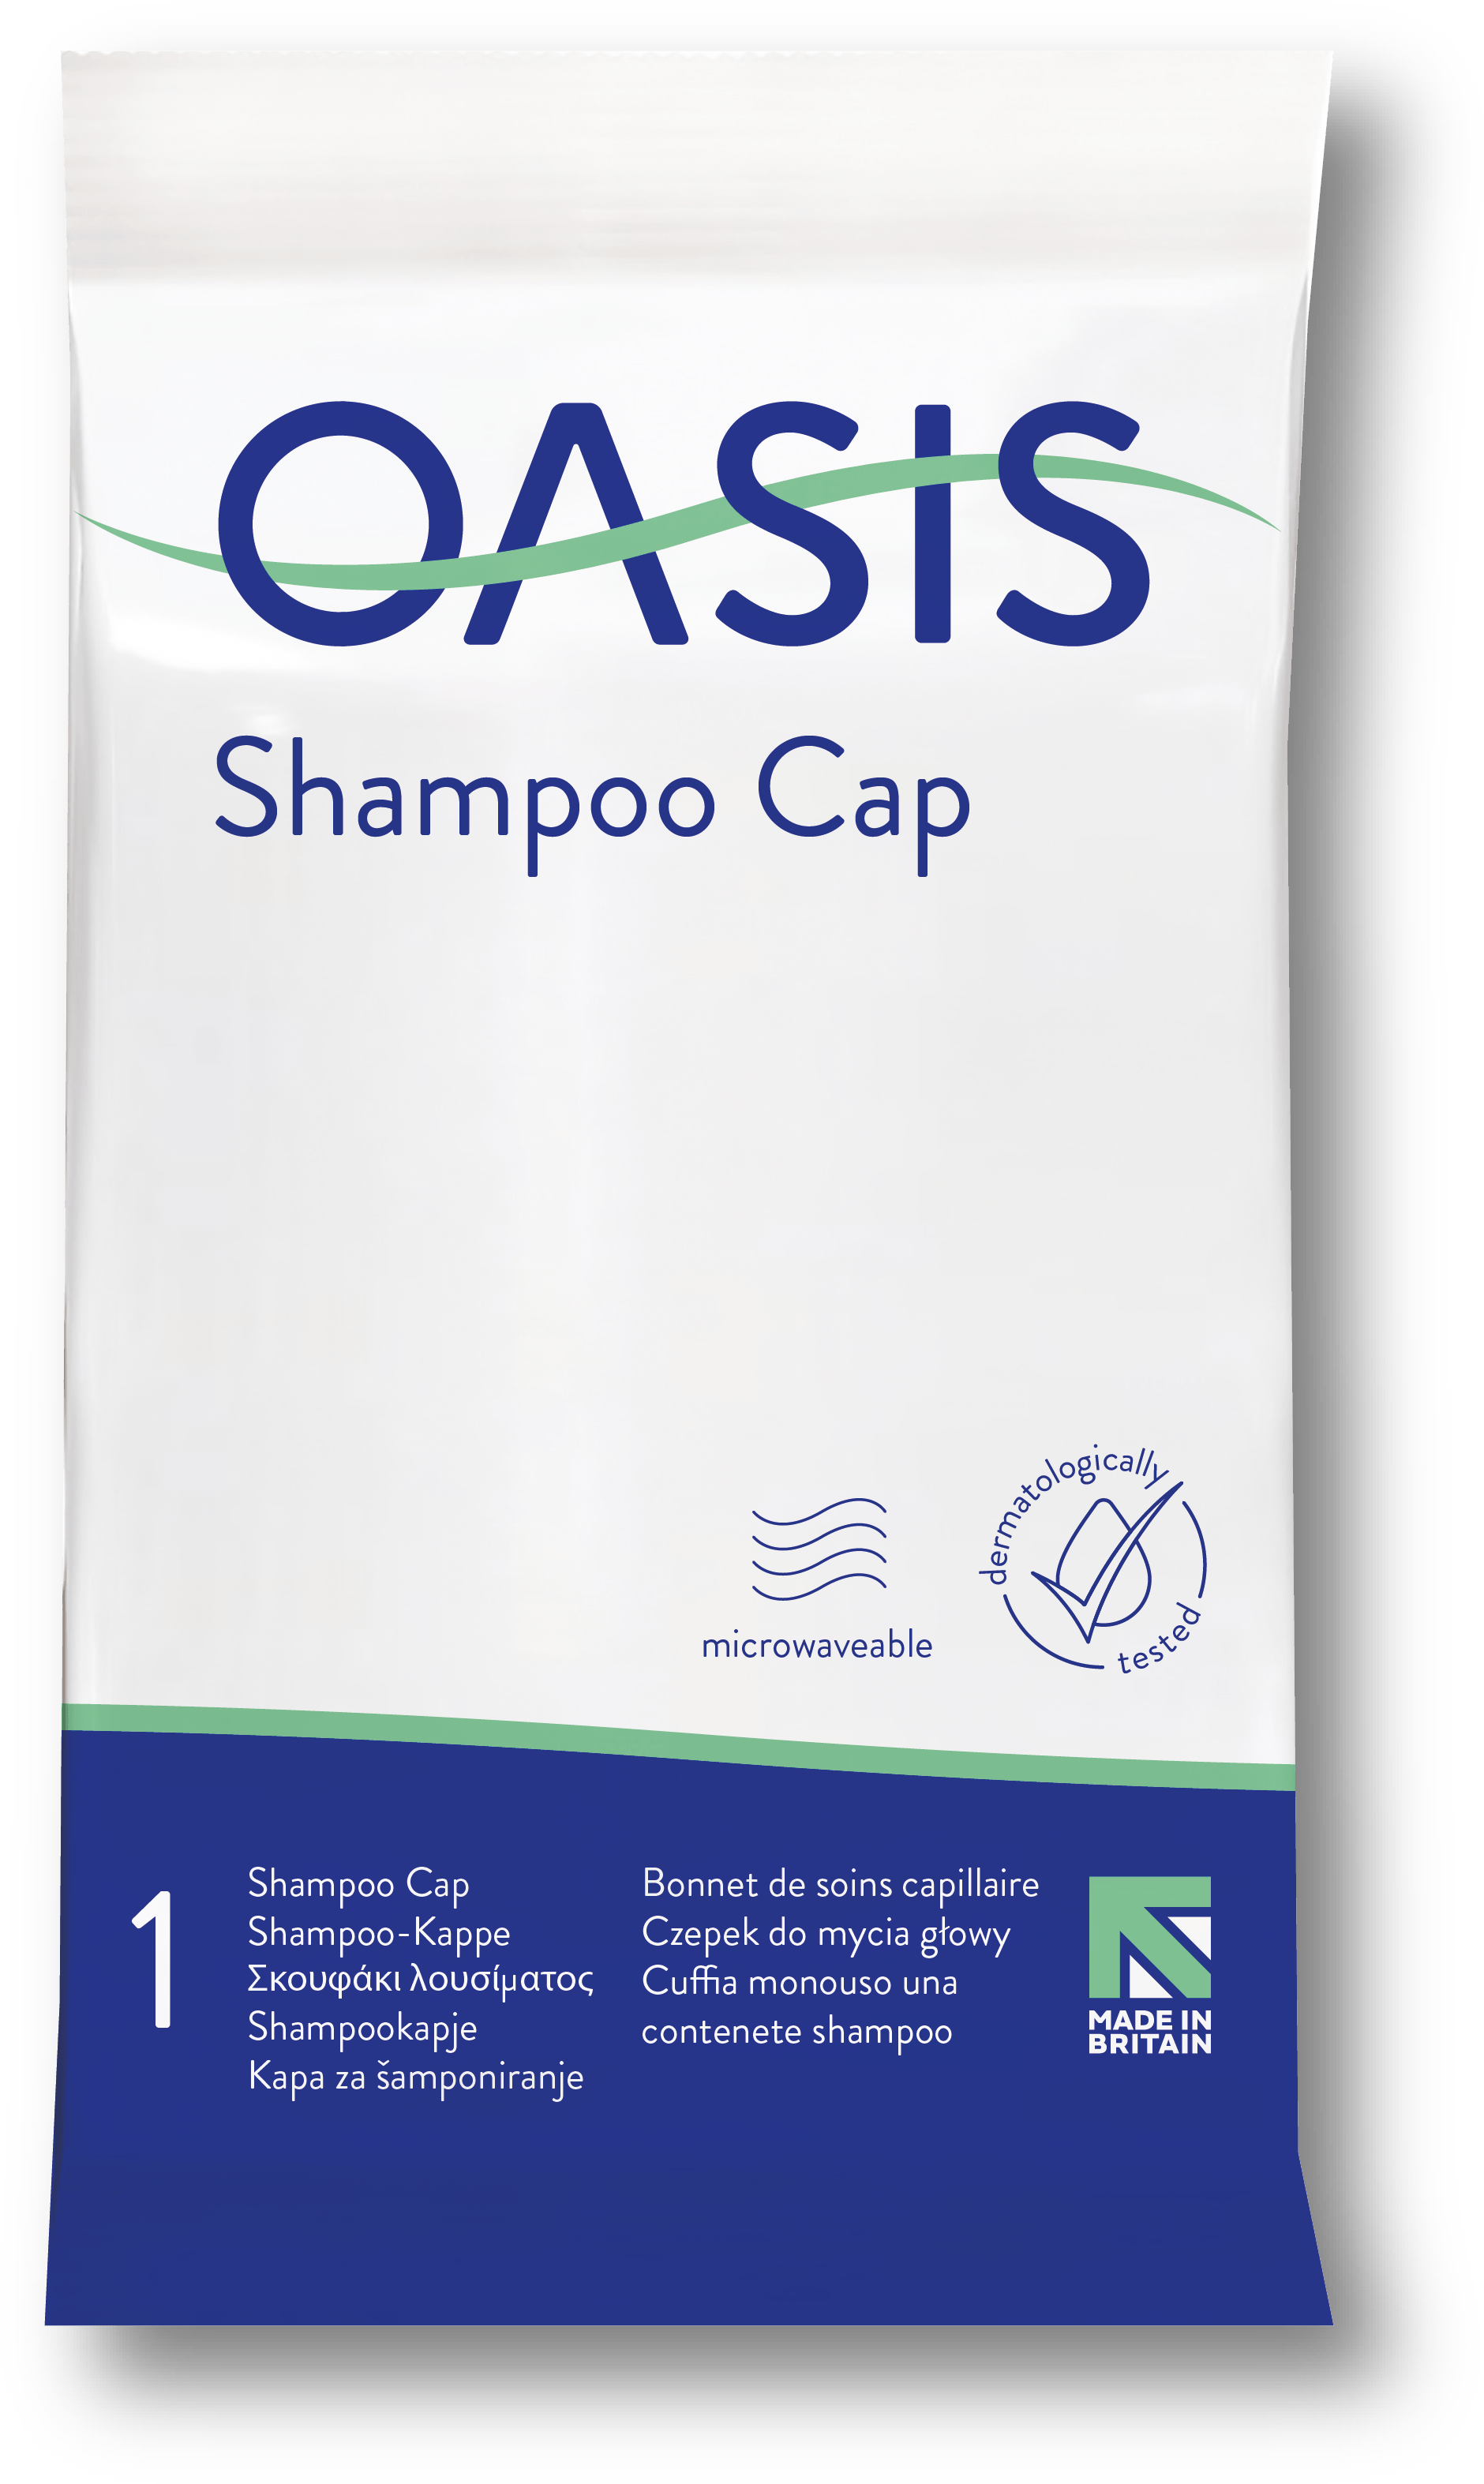 Oasis Shampoo Cap Product Packaging